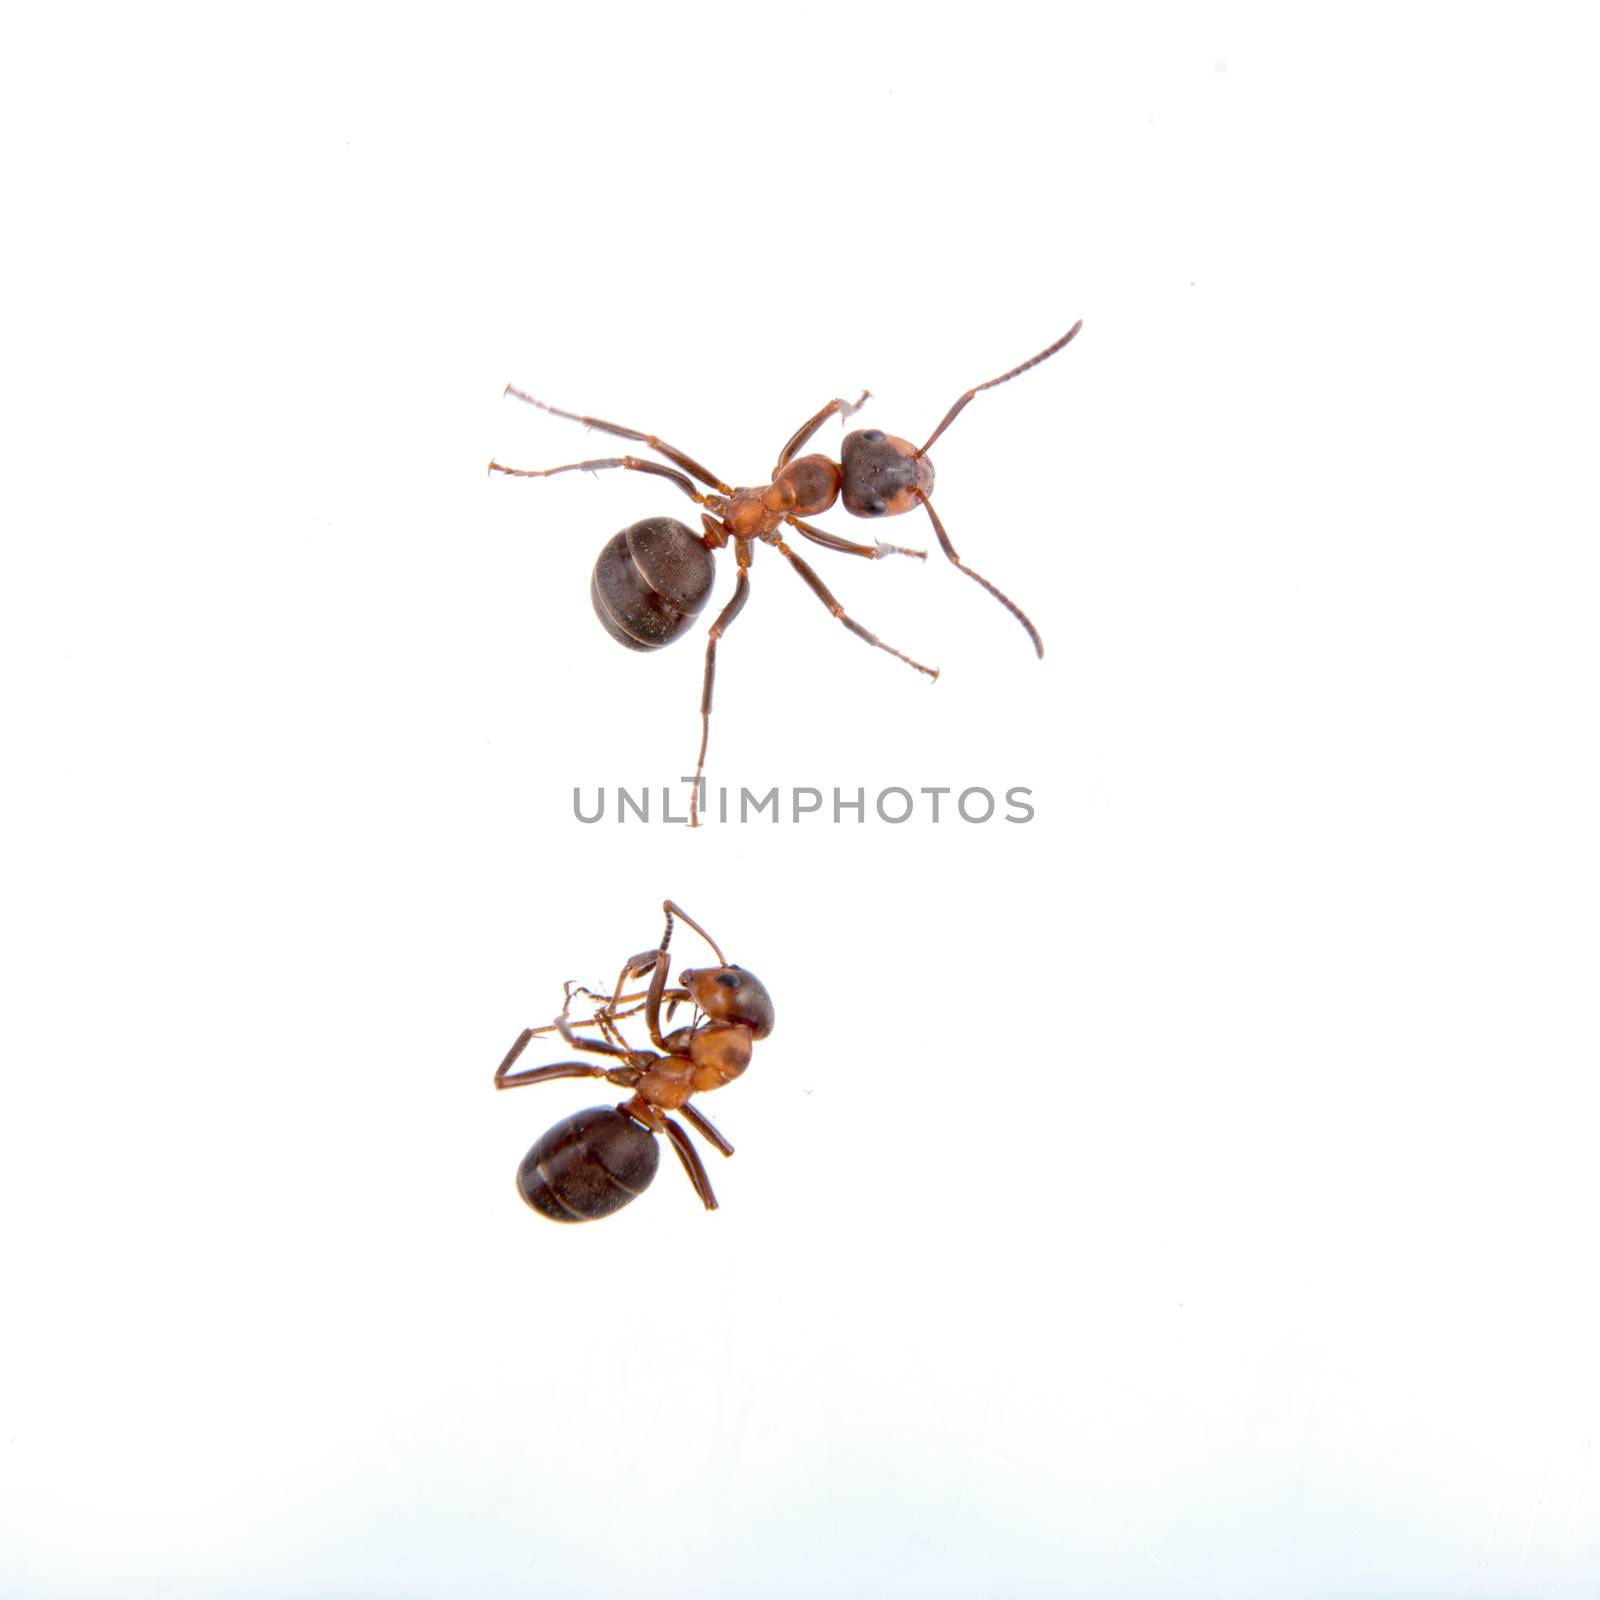 Two ants on a white background by neryx